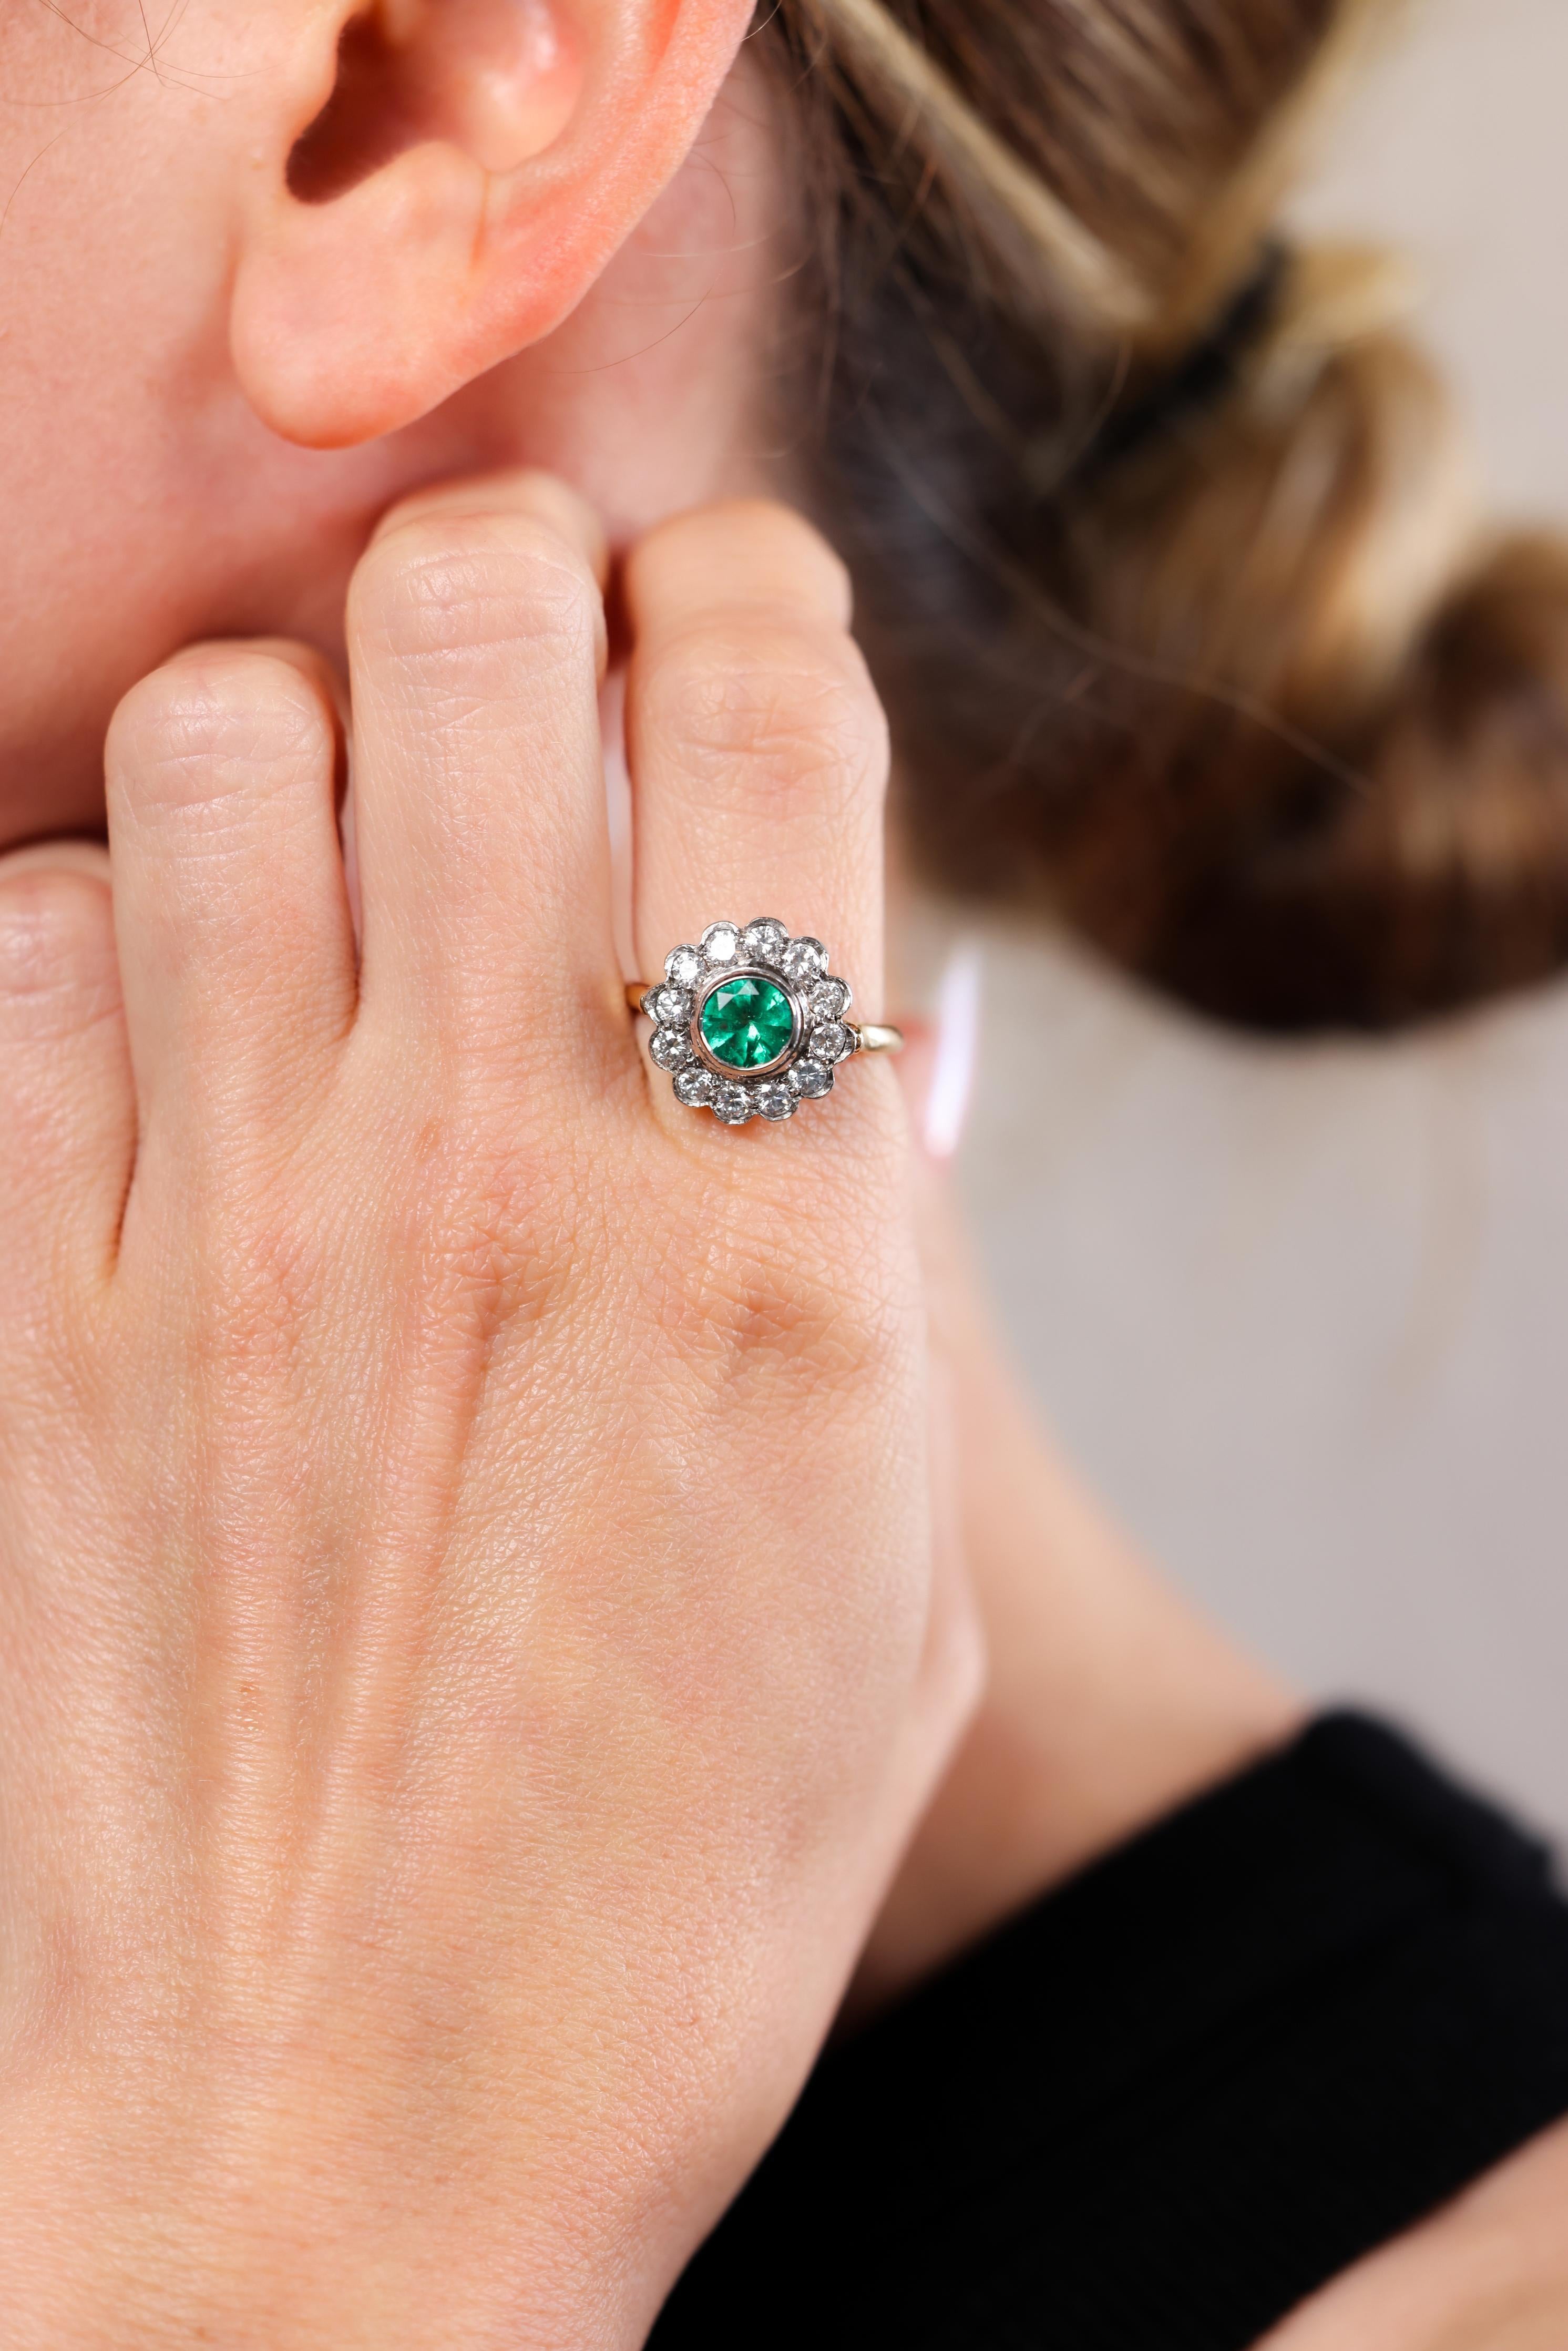 One Victorian Revival Emerald Diamond 14k Yellow Gold Platinum Cluster Ring. Featuring one round brilliant cut emerald weighing approximately 1.00 carat. Accented by 12 round brilliant cut diamonds with a total weight of approximately 1.00 carat,